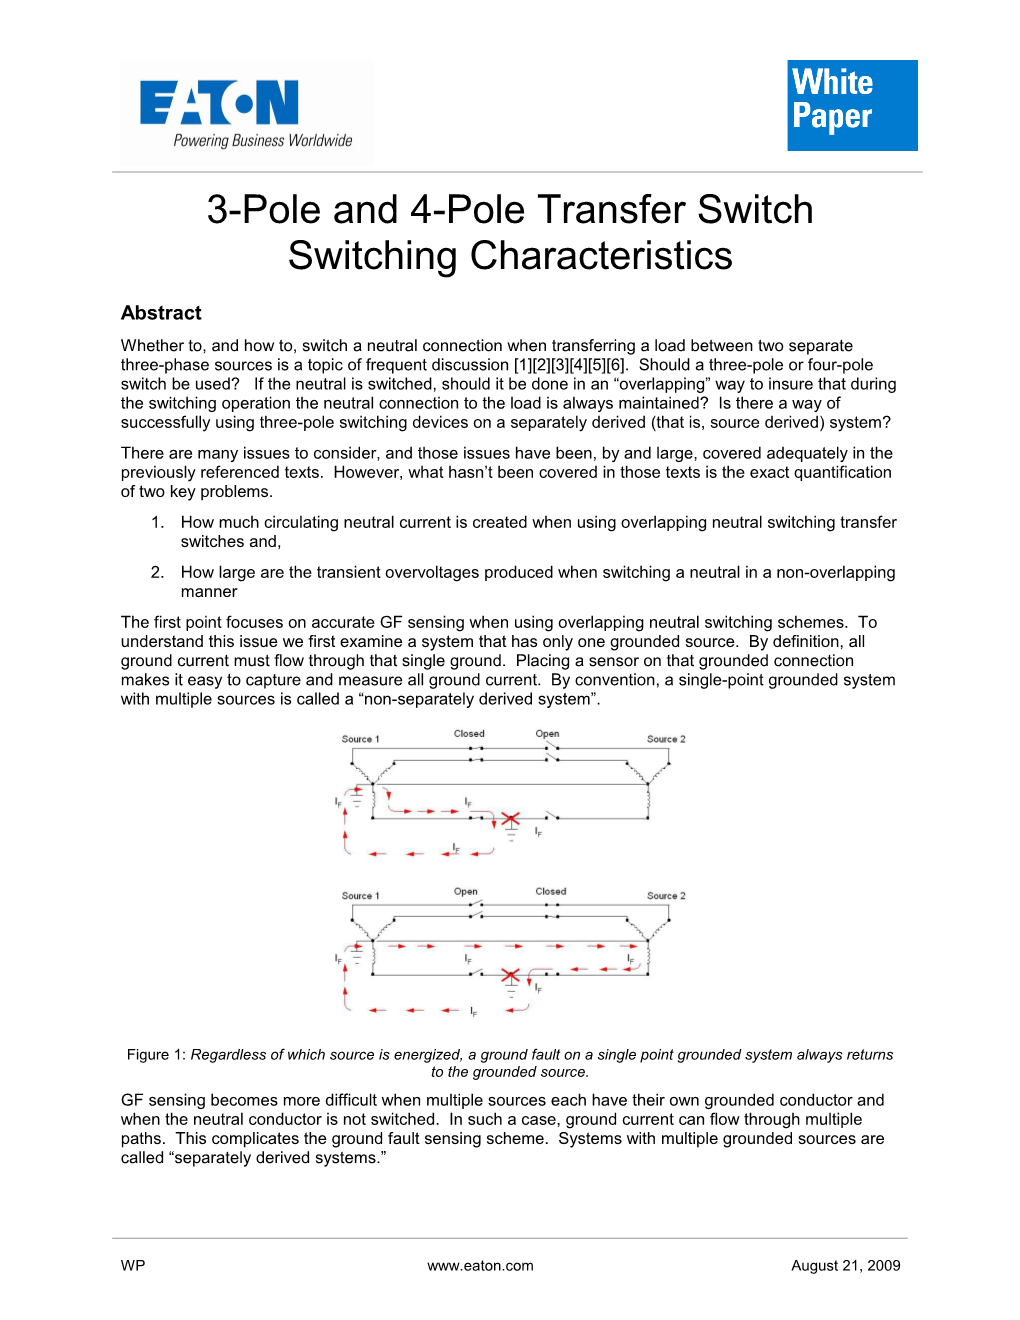 Modeled Load Transfer Switching Transients for 3-Pole and 4-Pole Switching Devices